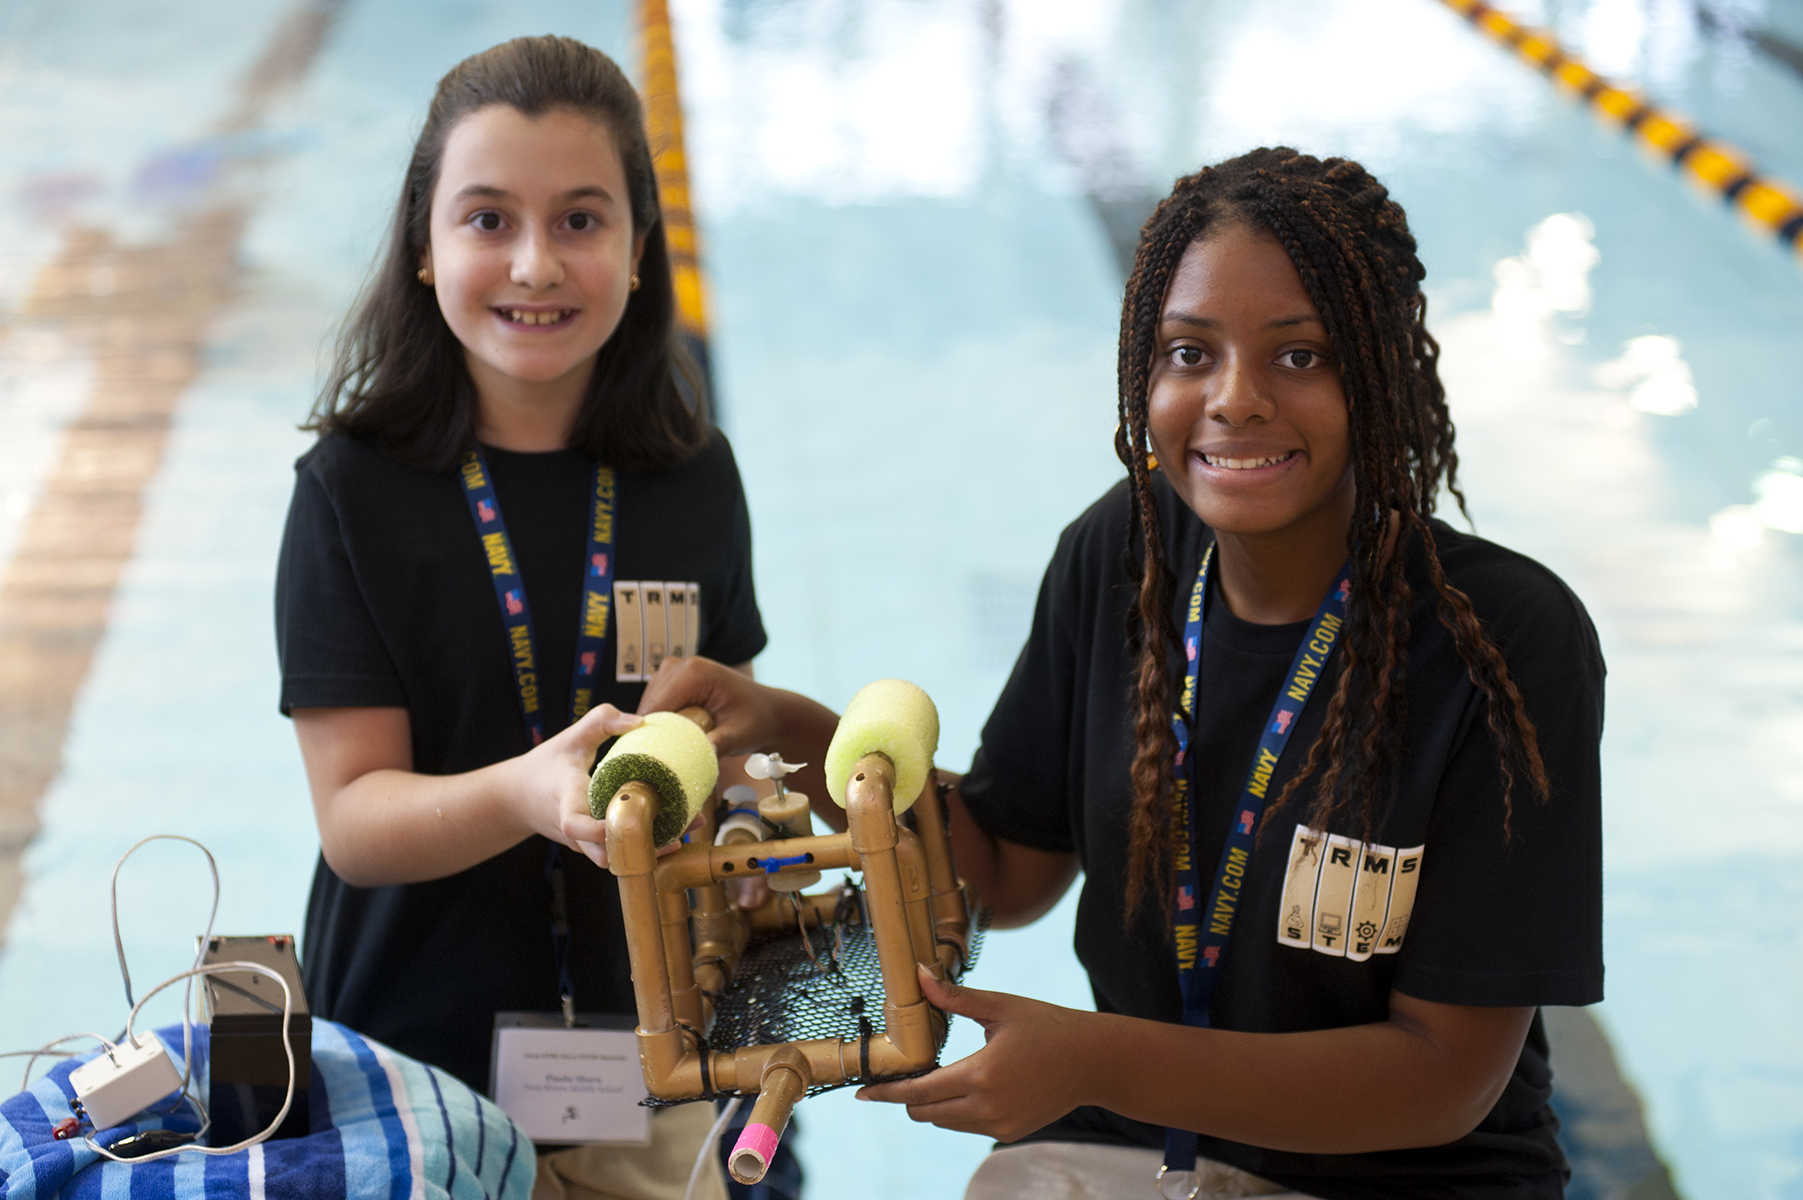 Student competitors work on their underwater remotely operated vehicle during the SeaPerch competition at the Georgia Tech McAuley Aquatic Center in 2015.